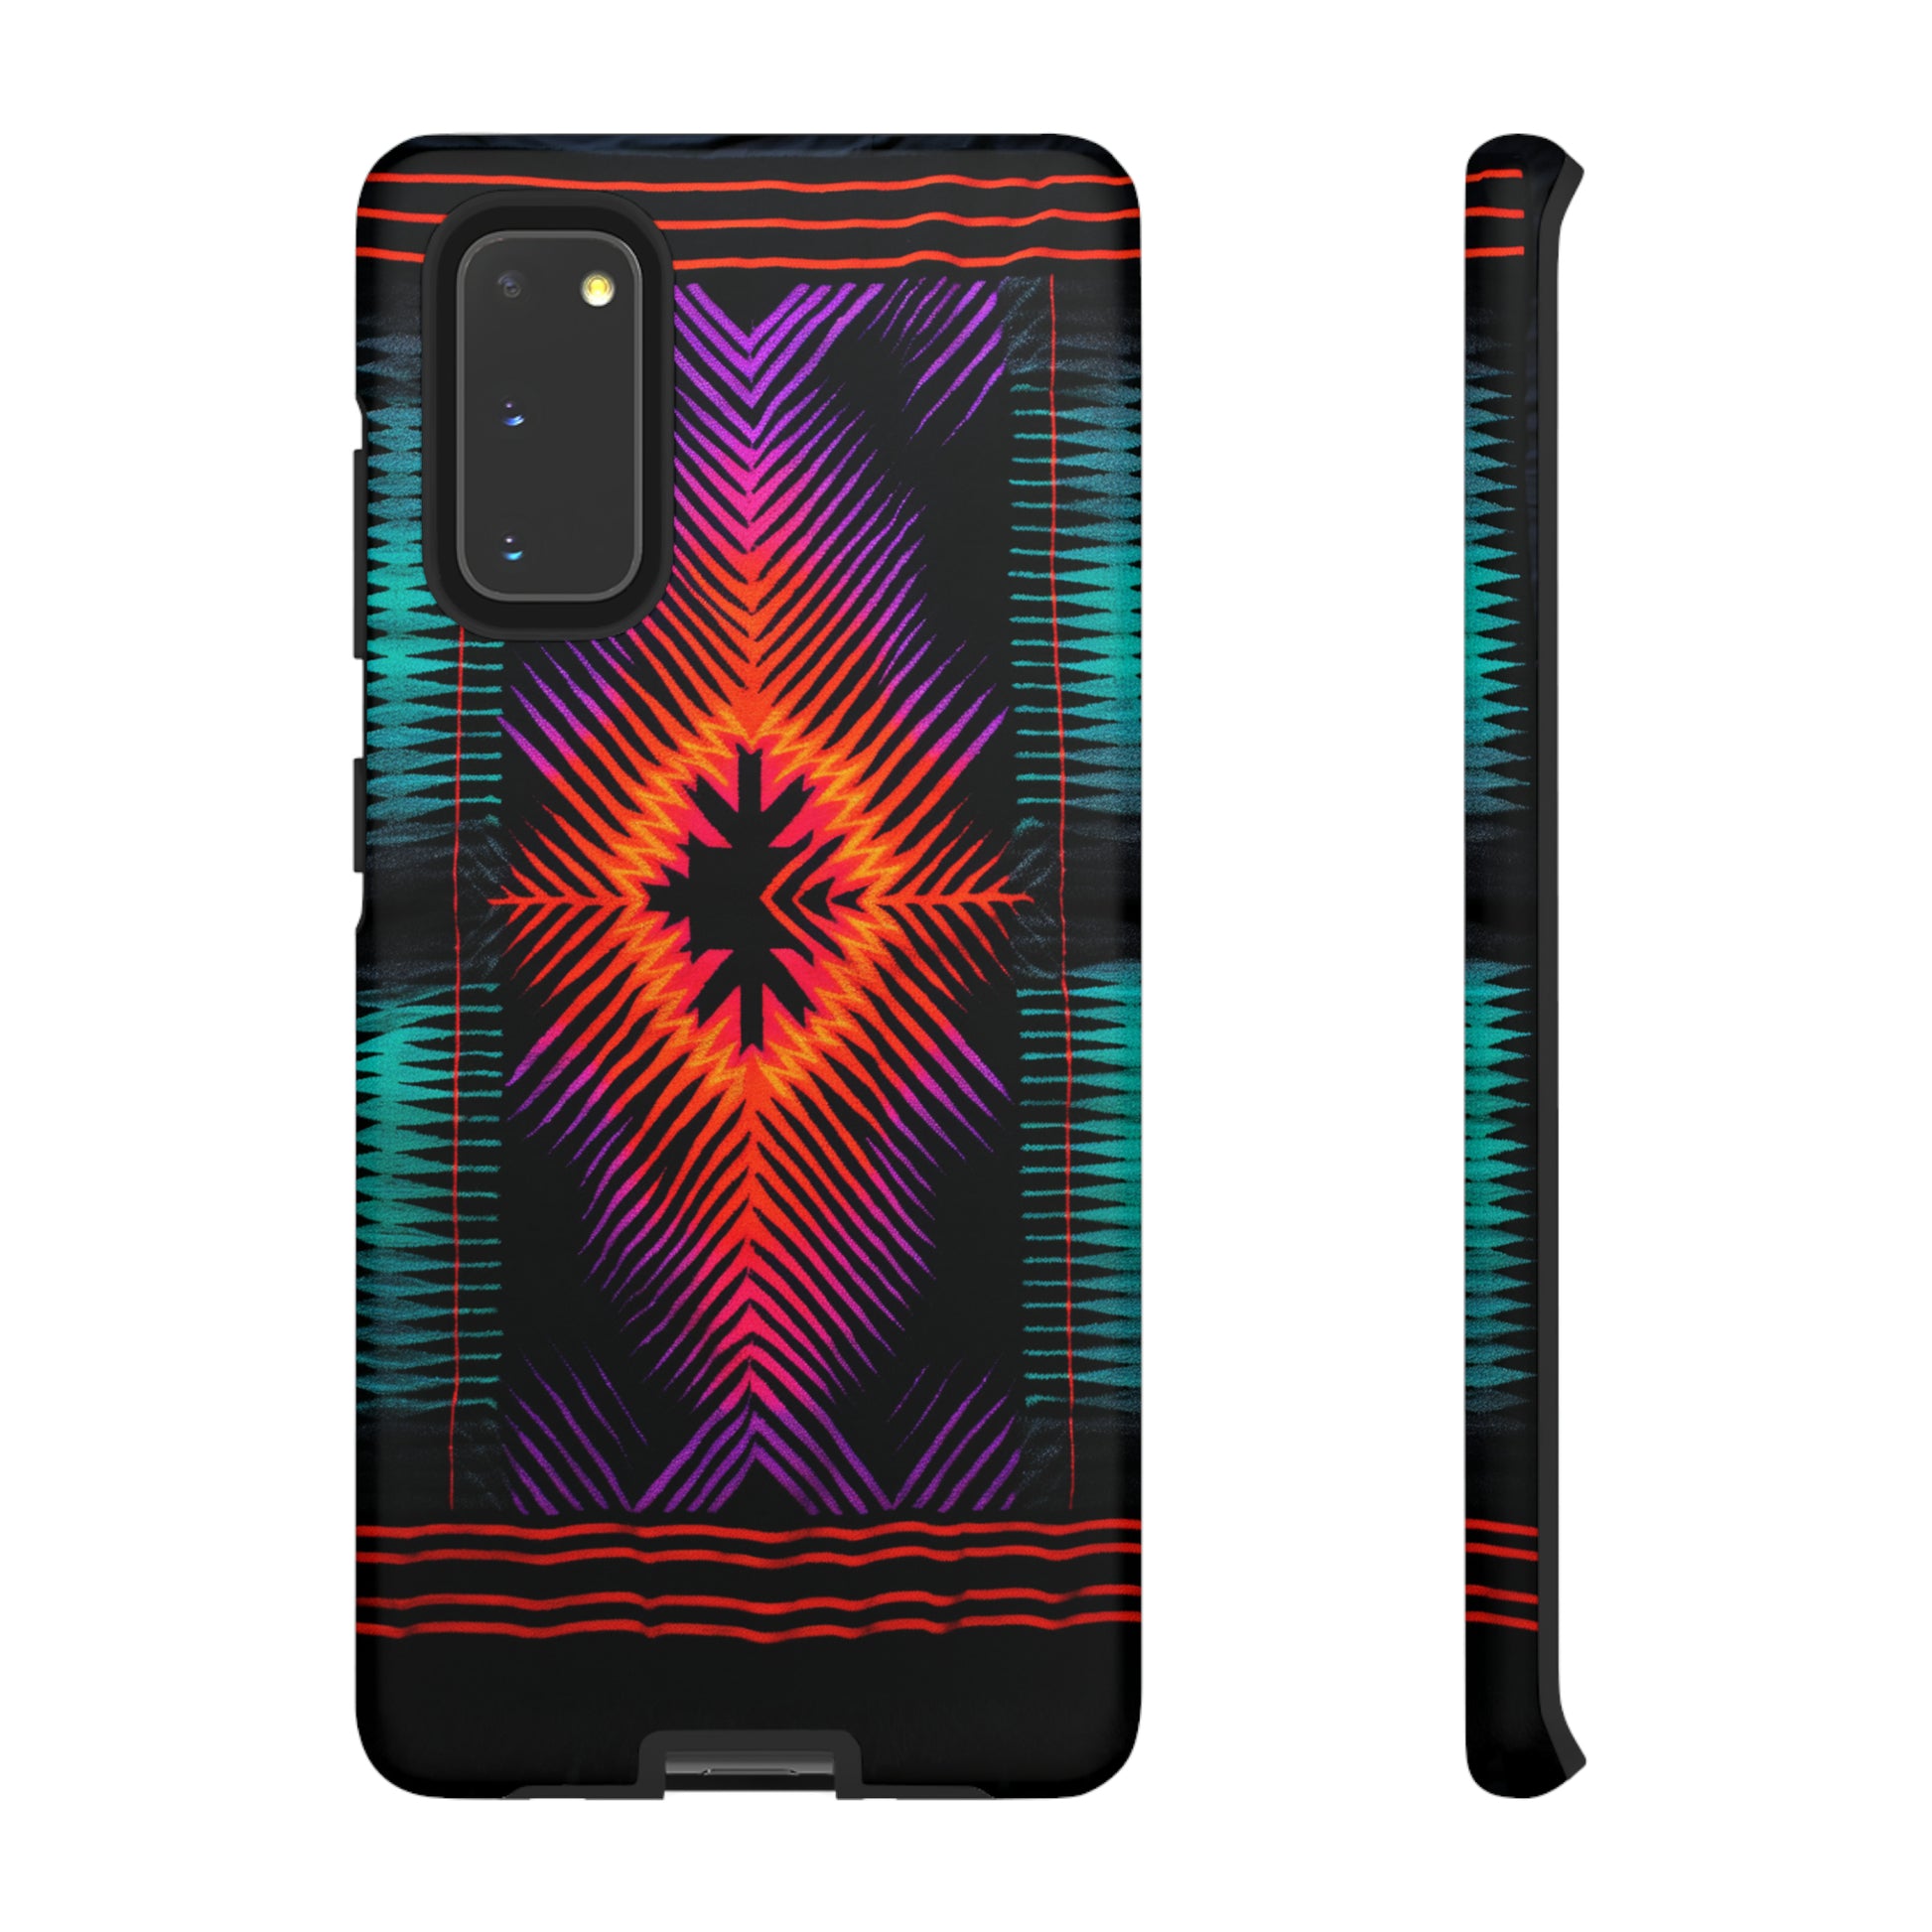 Native American Heritage Cover for iPhone XS Max